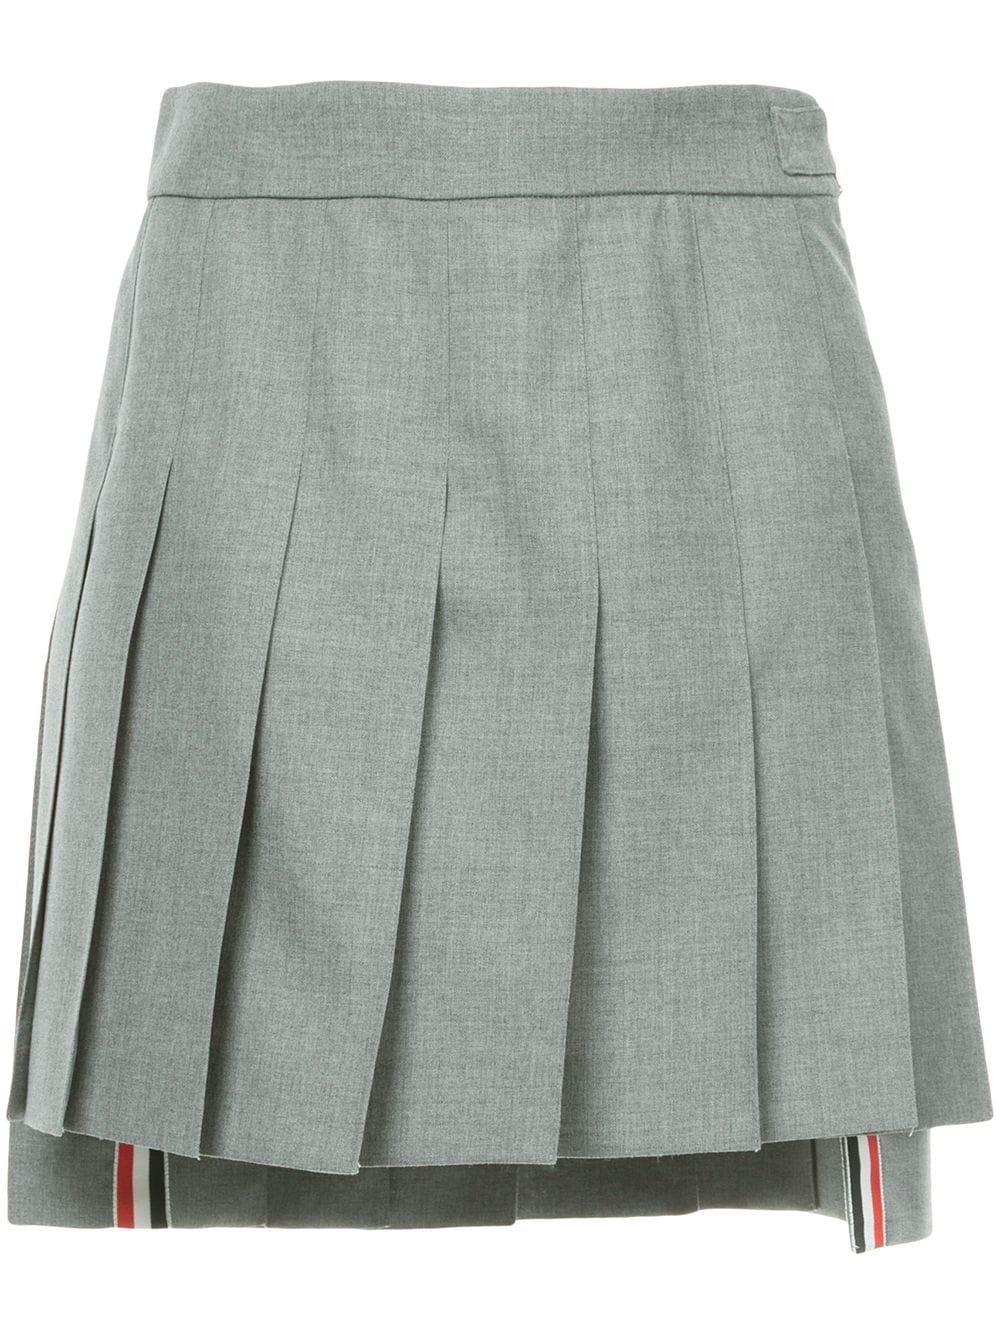 Thom Browne Wool Dropped Back Mini Pleated Skirt in Grey (Gray) - Lyst